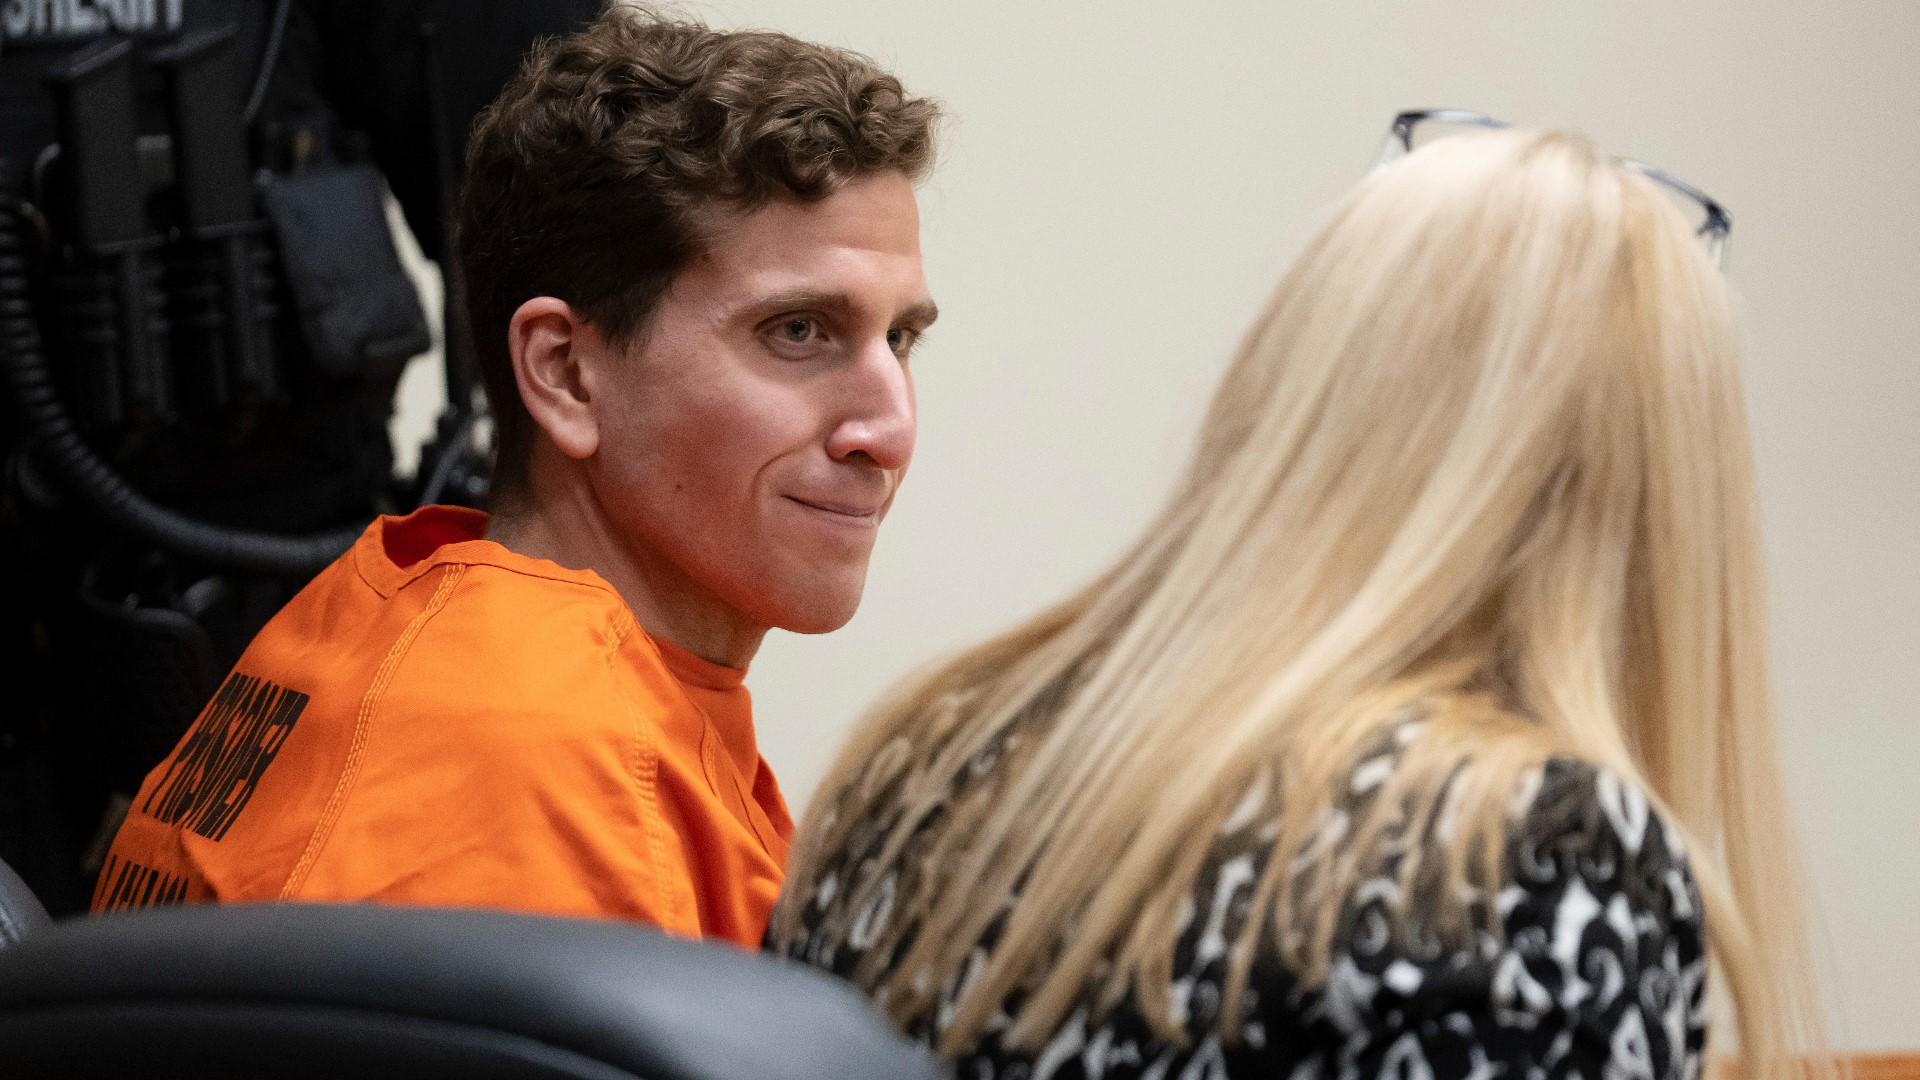 Bryan Kohberger, the man accused of murdering four University of Idaho students, is asking the court to object to a motion filed by the media.